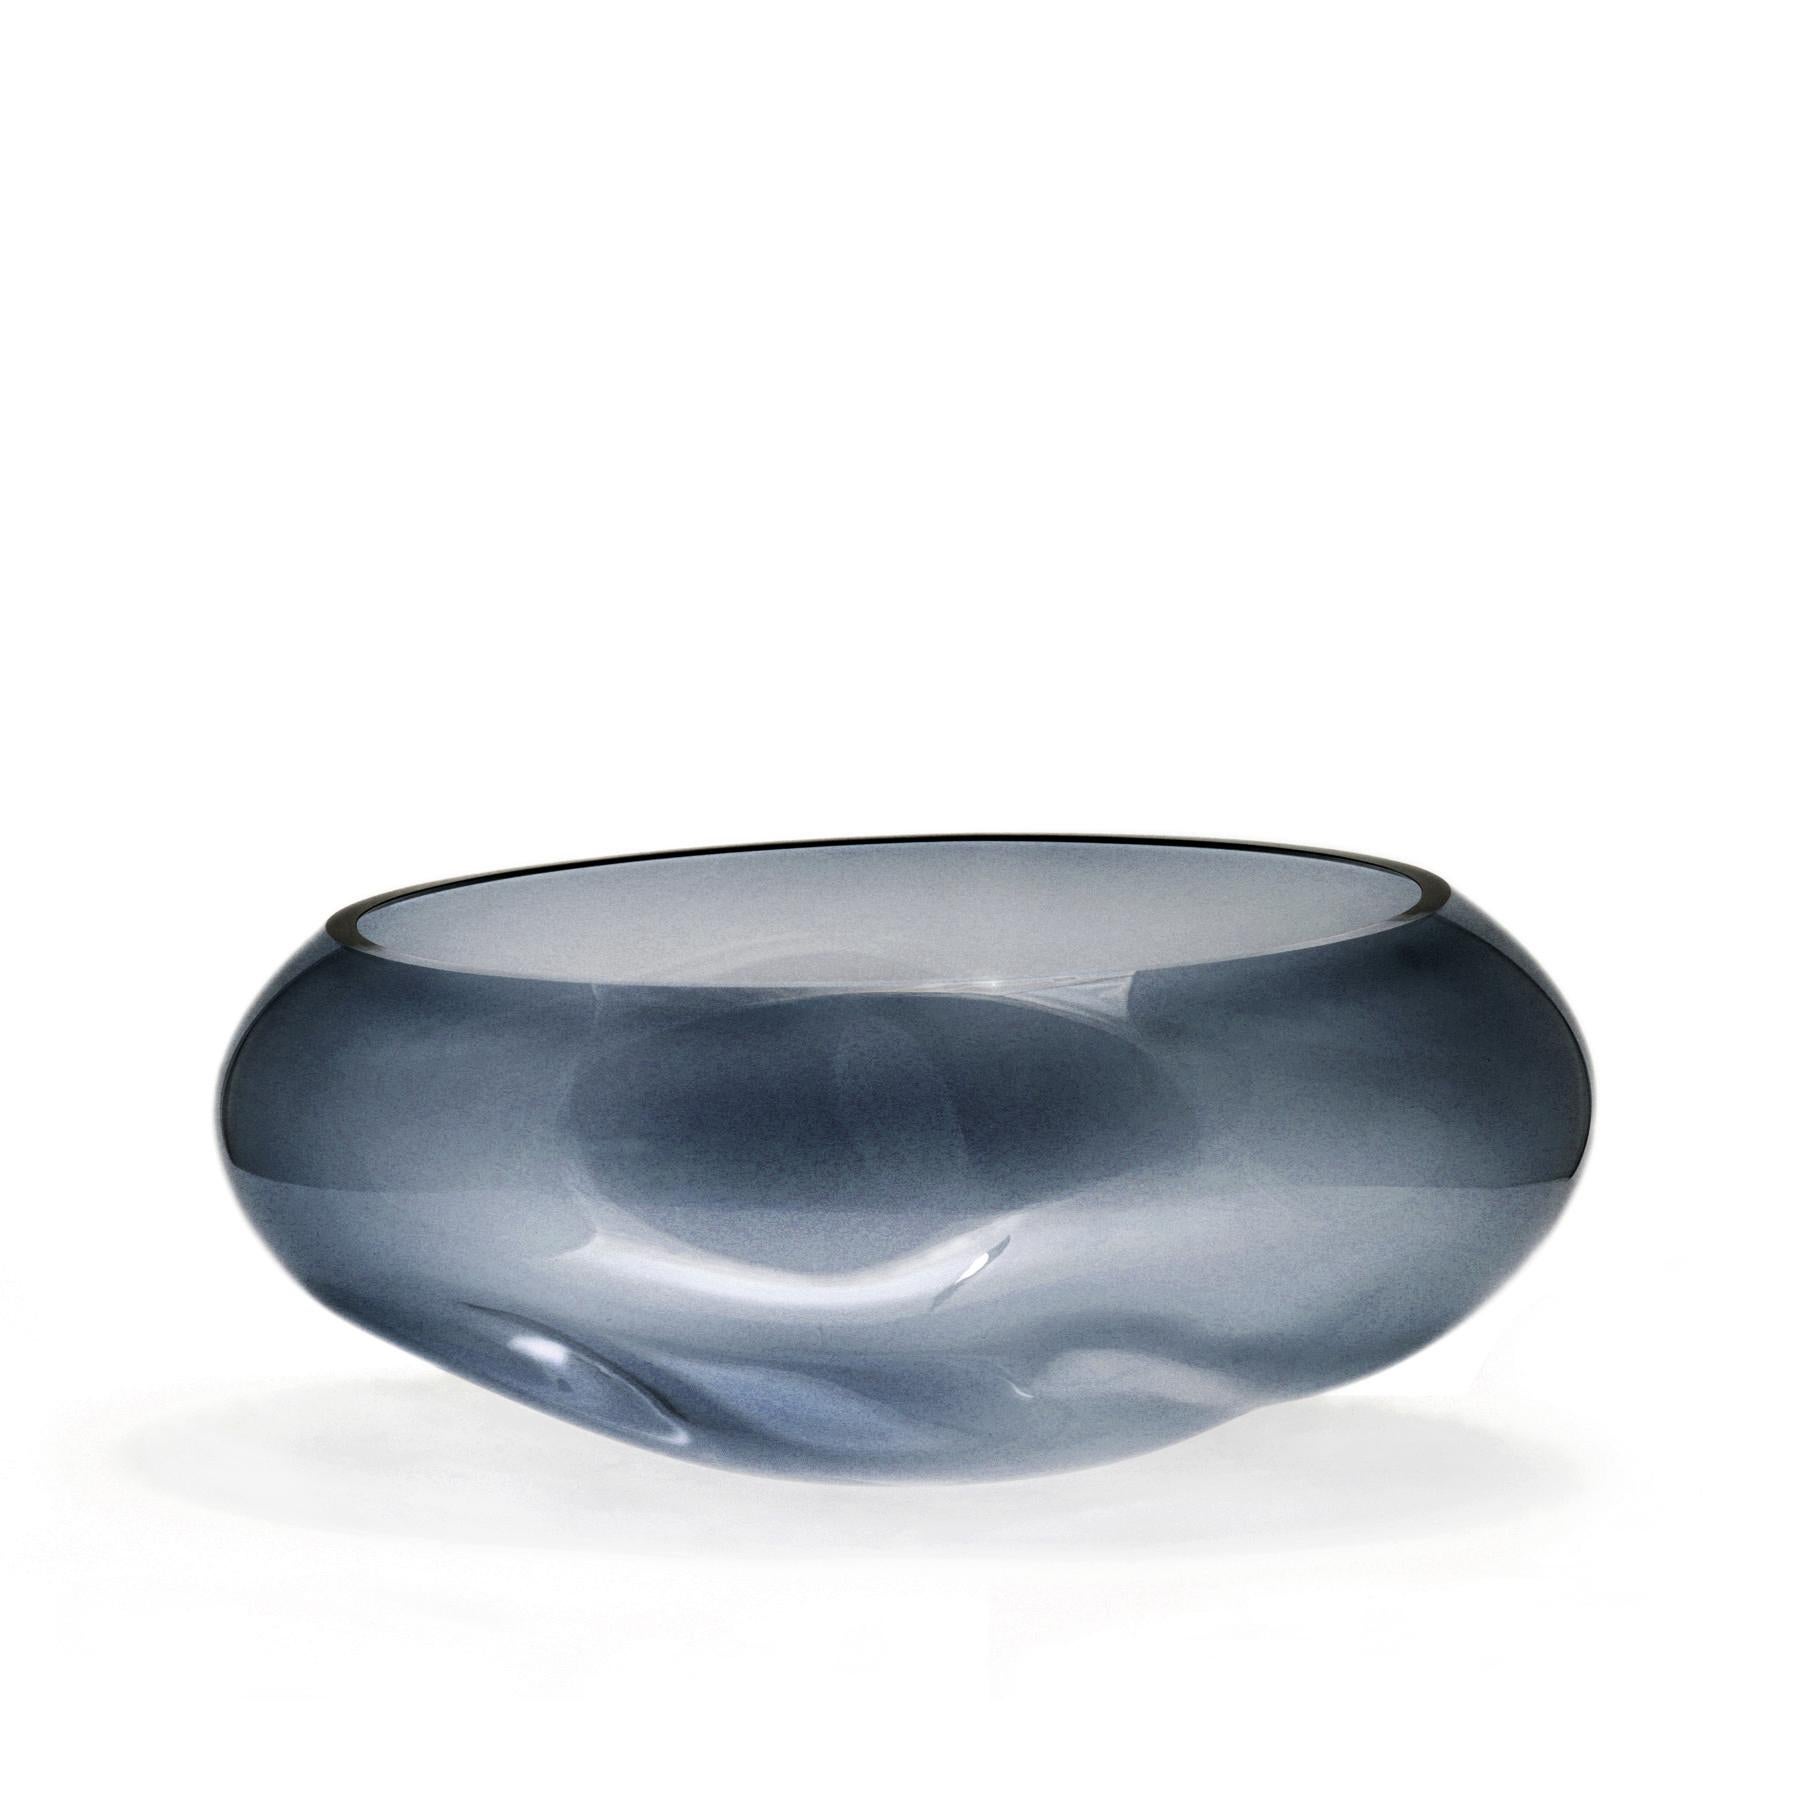 Supernova I steel blue M bowl + vase by ELOA
No UL listed 
Material: Glass
Dimensions: D 24 x W 37 x H 17 cm
Also Available in different colors and dimensions.
Supernova is a rare and magical visual phenomenon that manifests itself as a quick